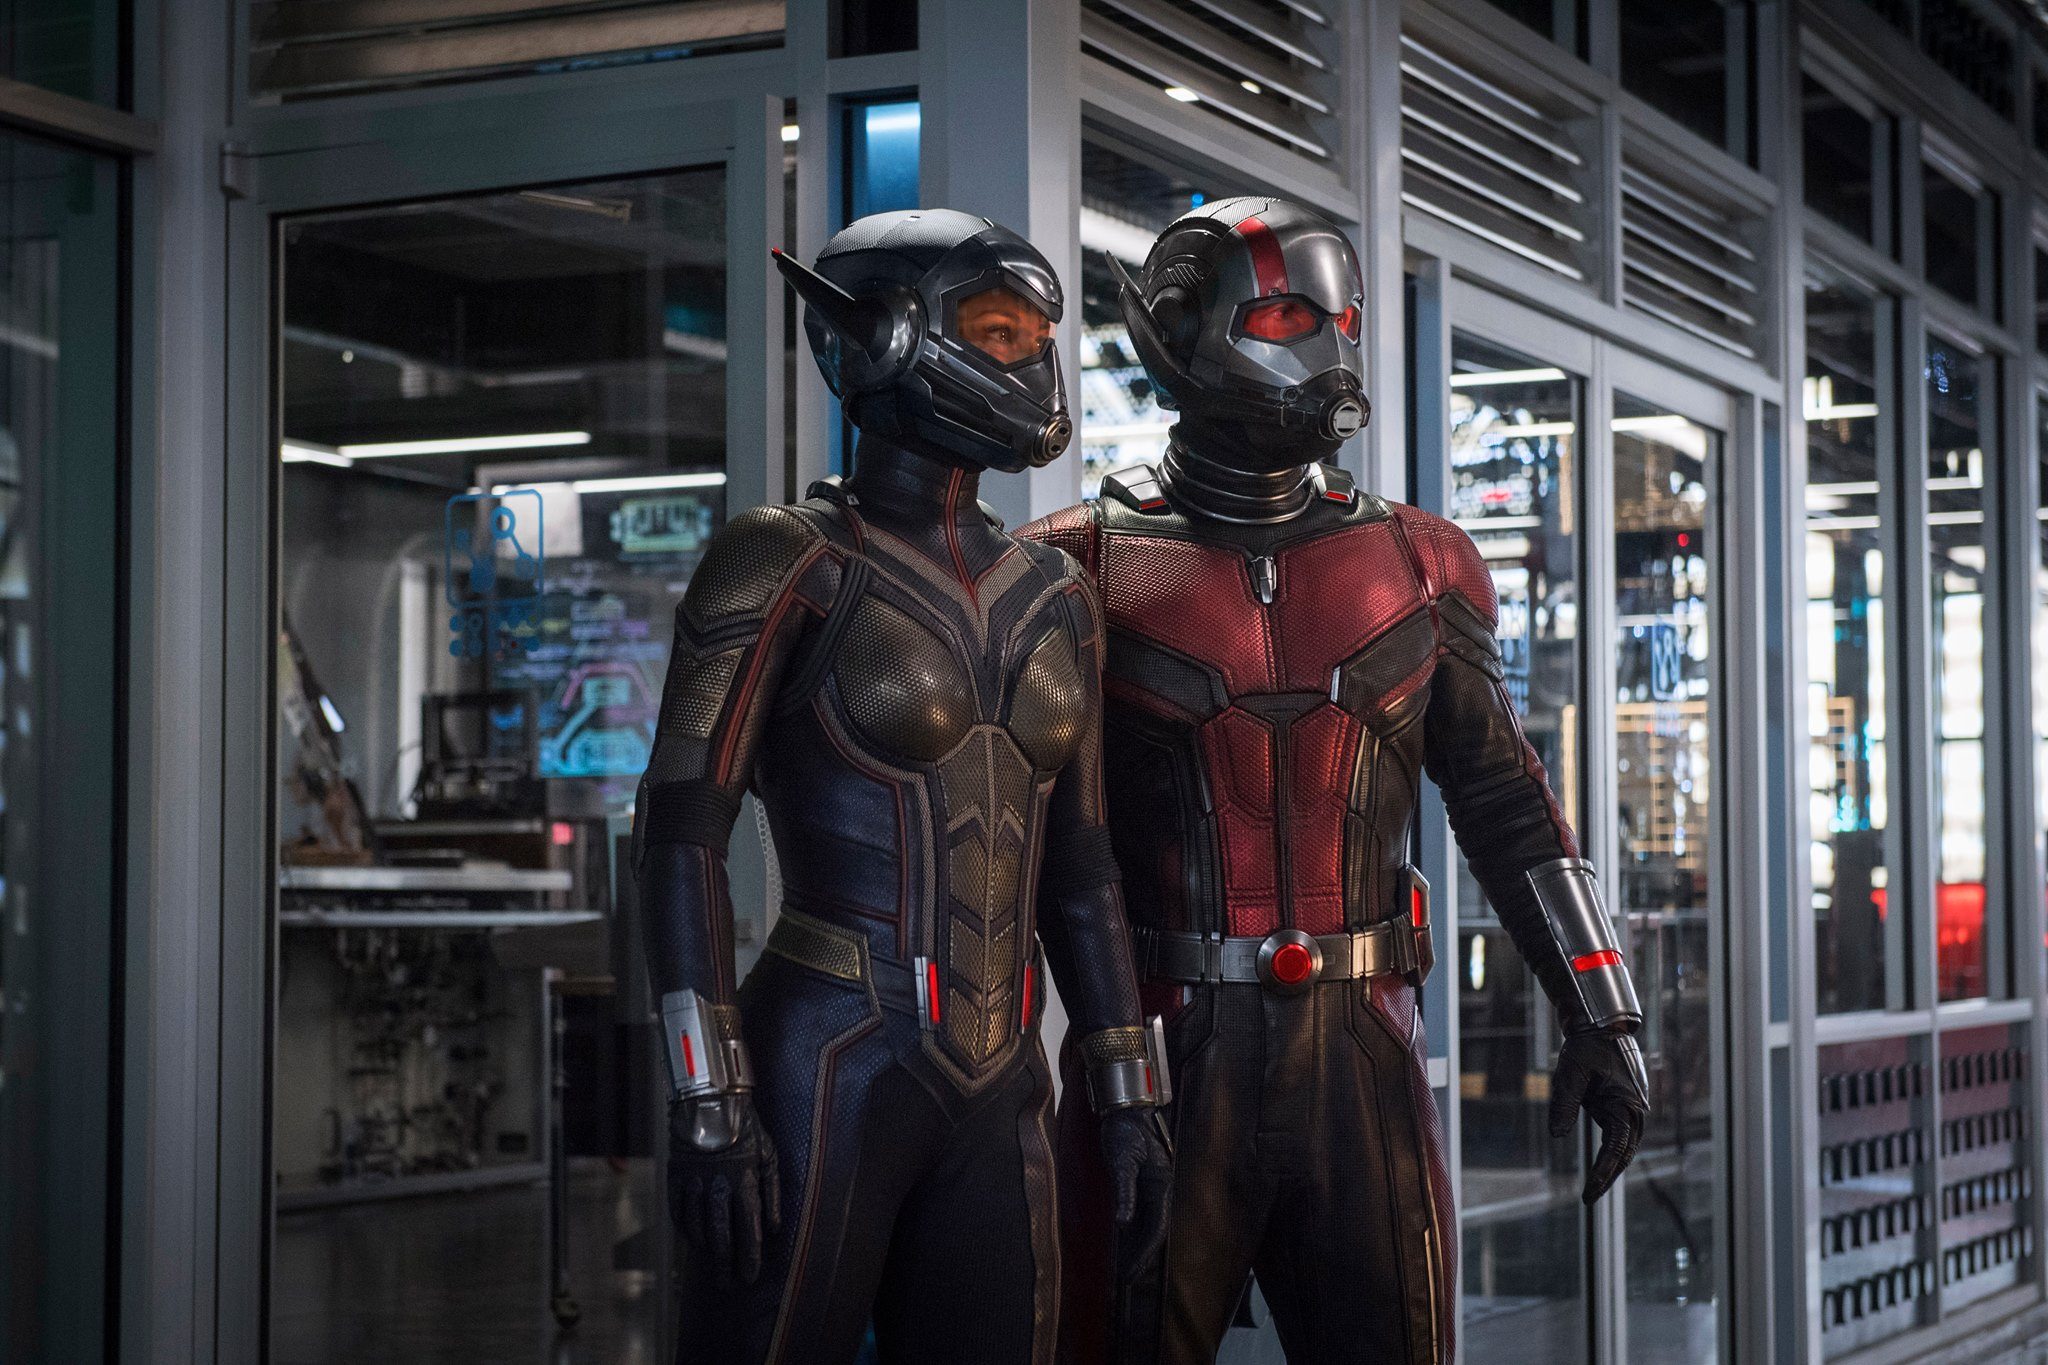 ‘Ant-Man and the Wasp’: Marvel’s first superheroine movie